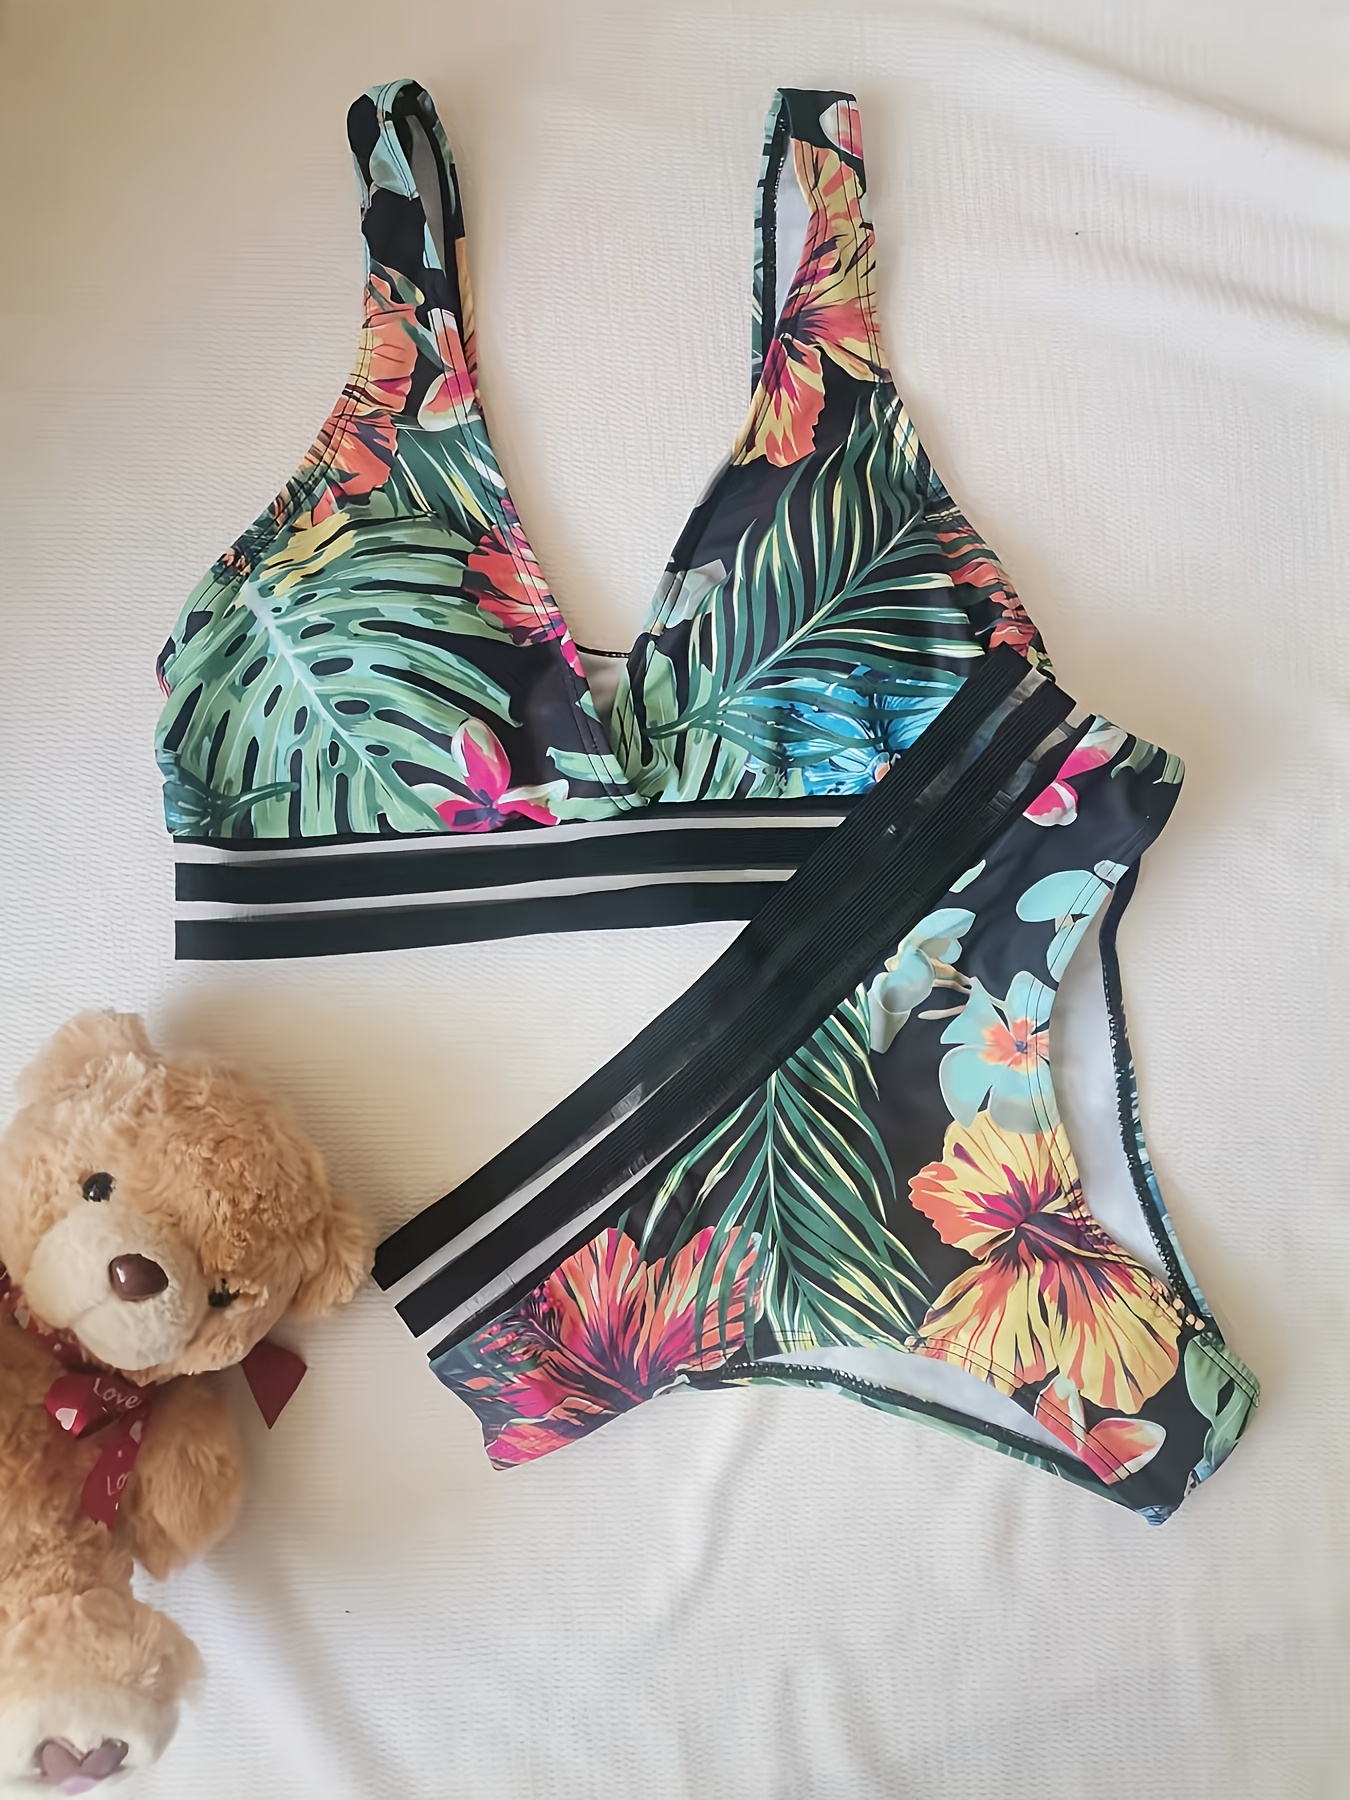 Two Piece French Bathing Suit - Horizontal Striped / Tropical prints